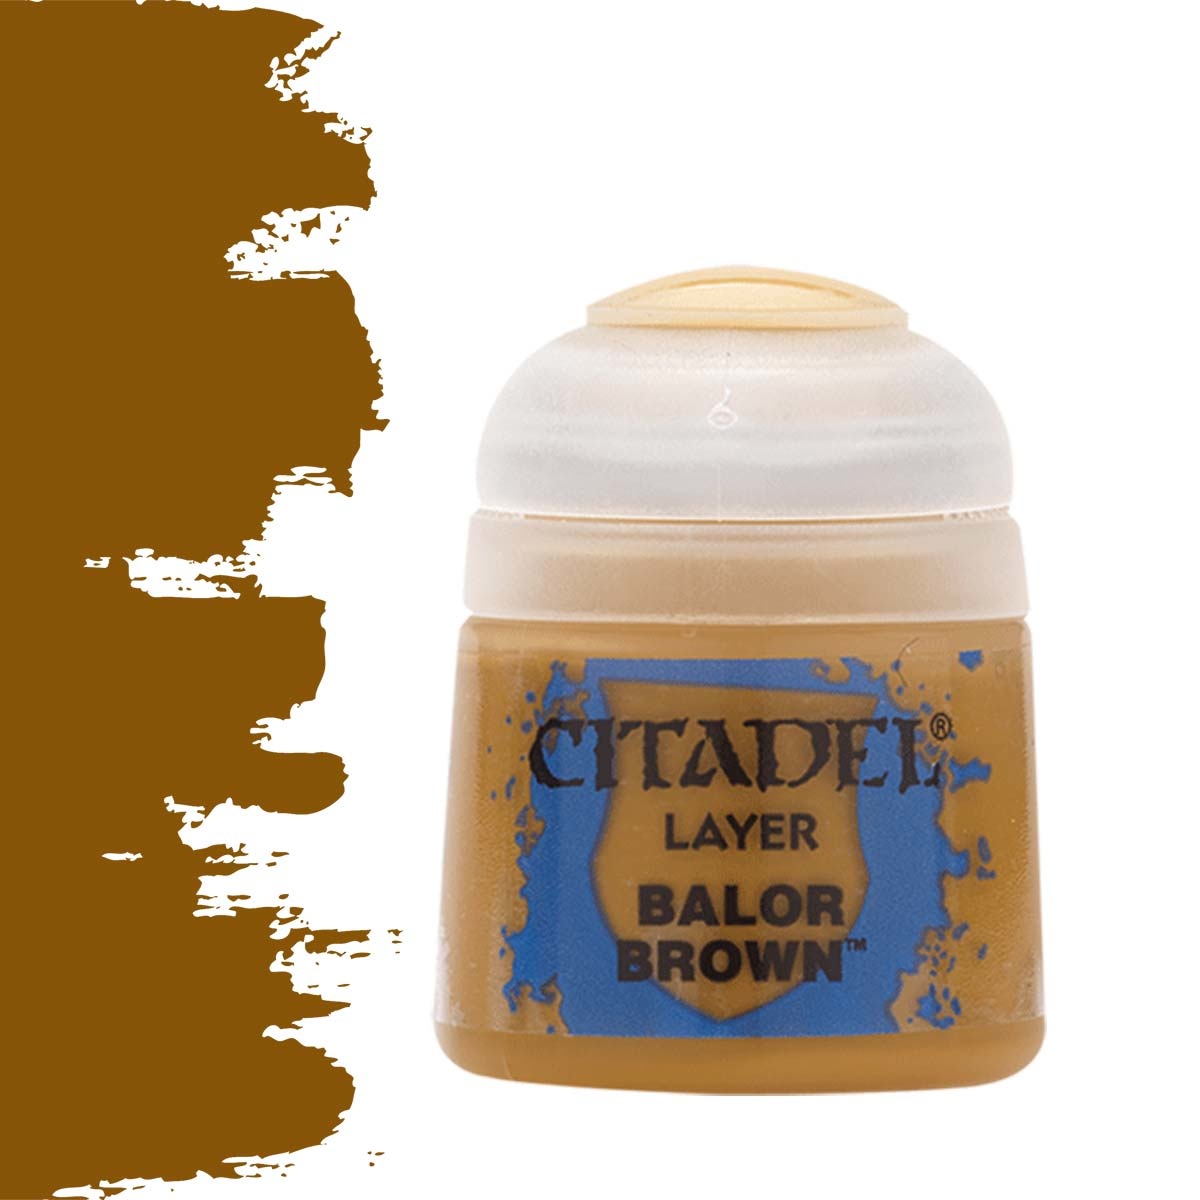 Citadel Balor Brown - Layer Paint - 12ml - 22-43 - Buy now at Scenery ...